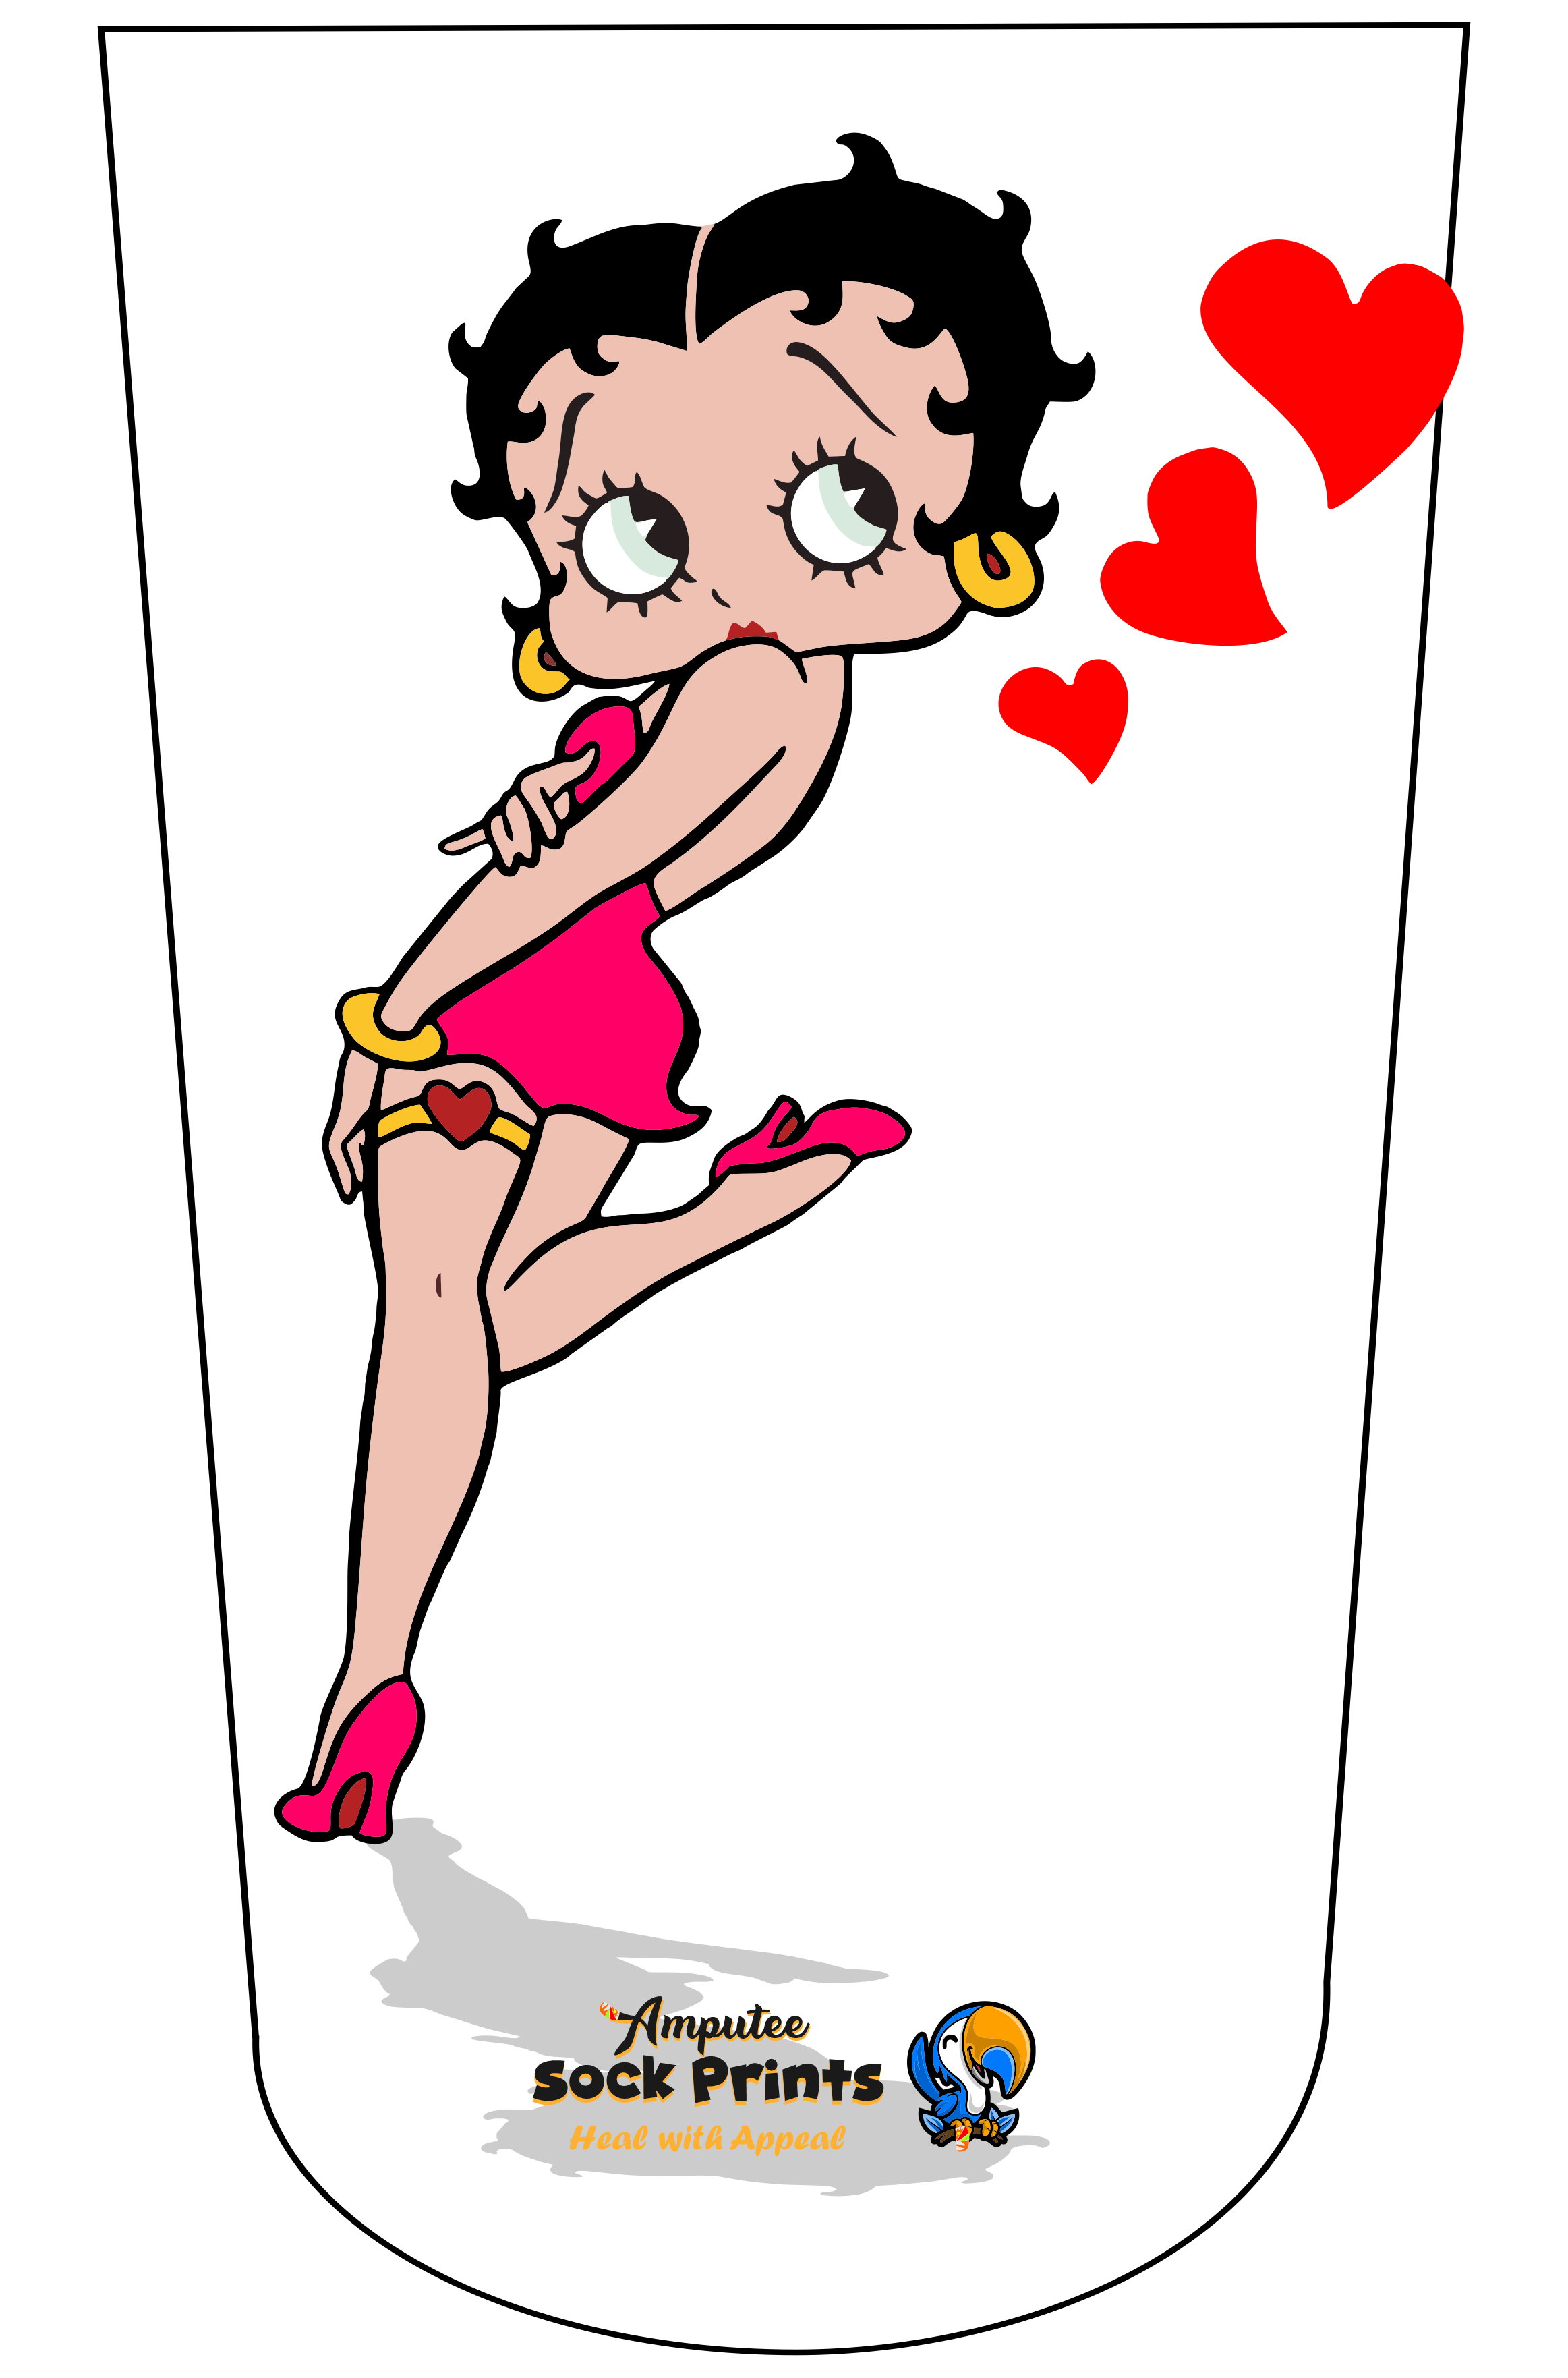 BettyBoop Floating Hearts V1